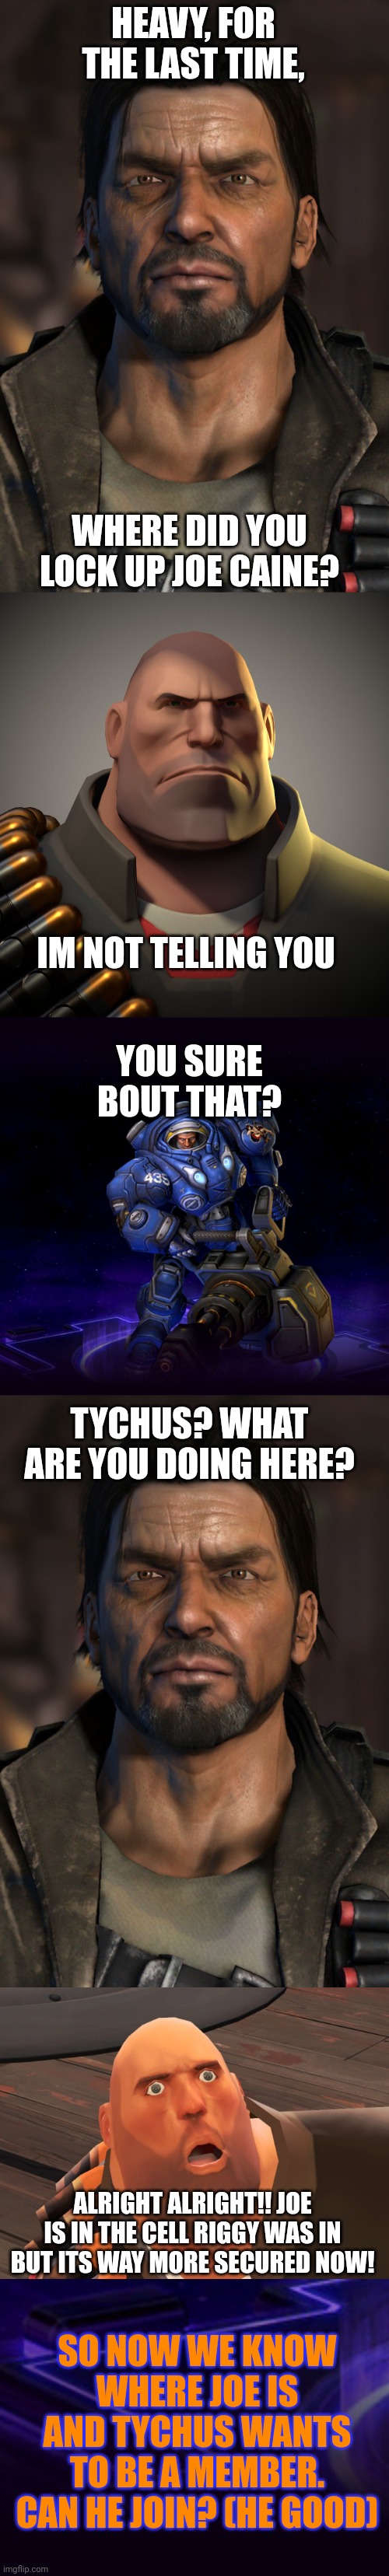 tychus wants revenge for he also was locked up at wheatley's base but ...